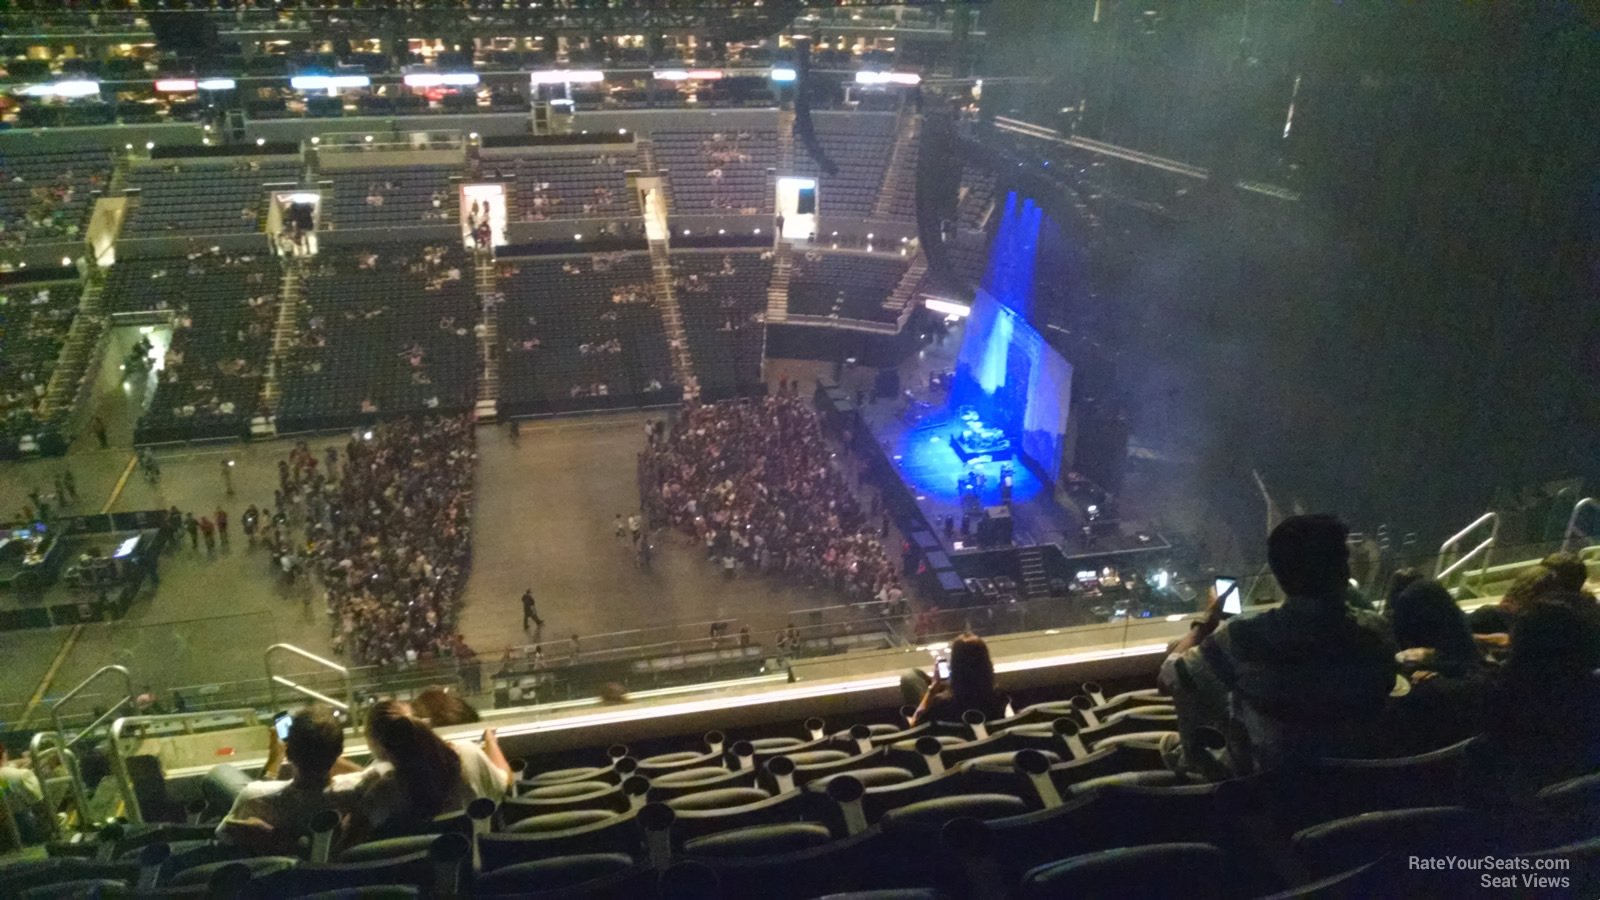 Staples Center Section 334 Concert Seating - RateYourSeats.com